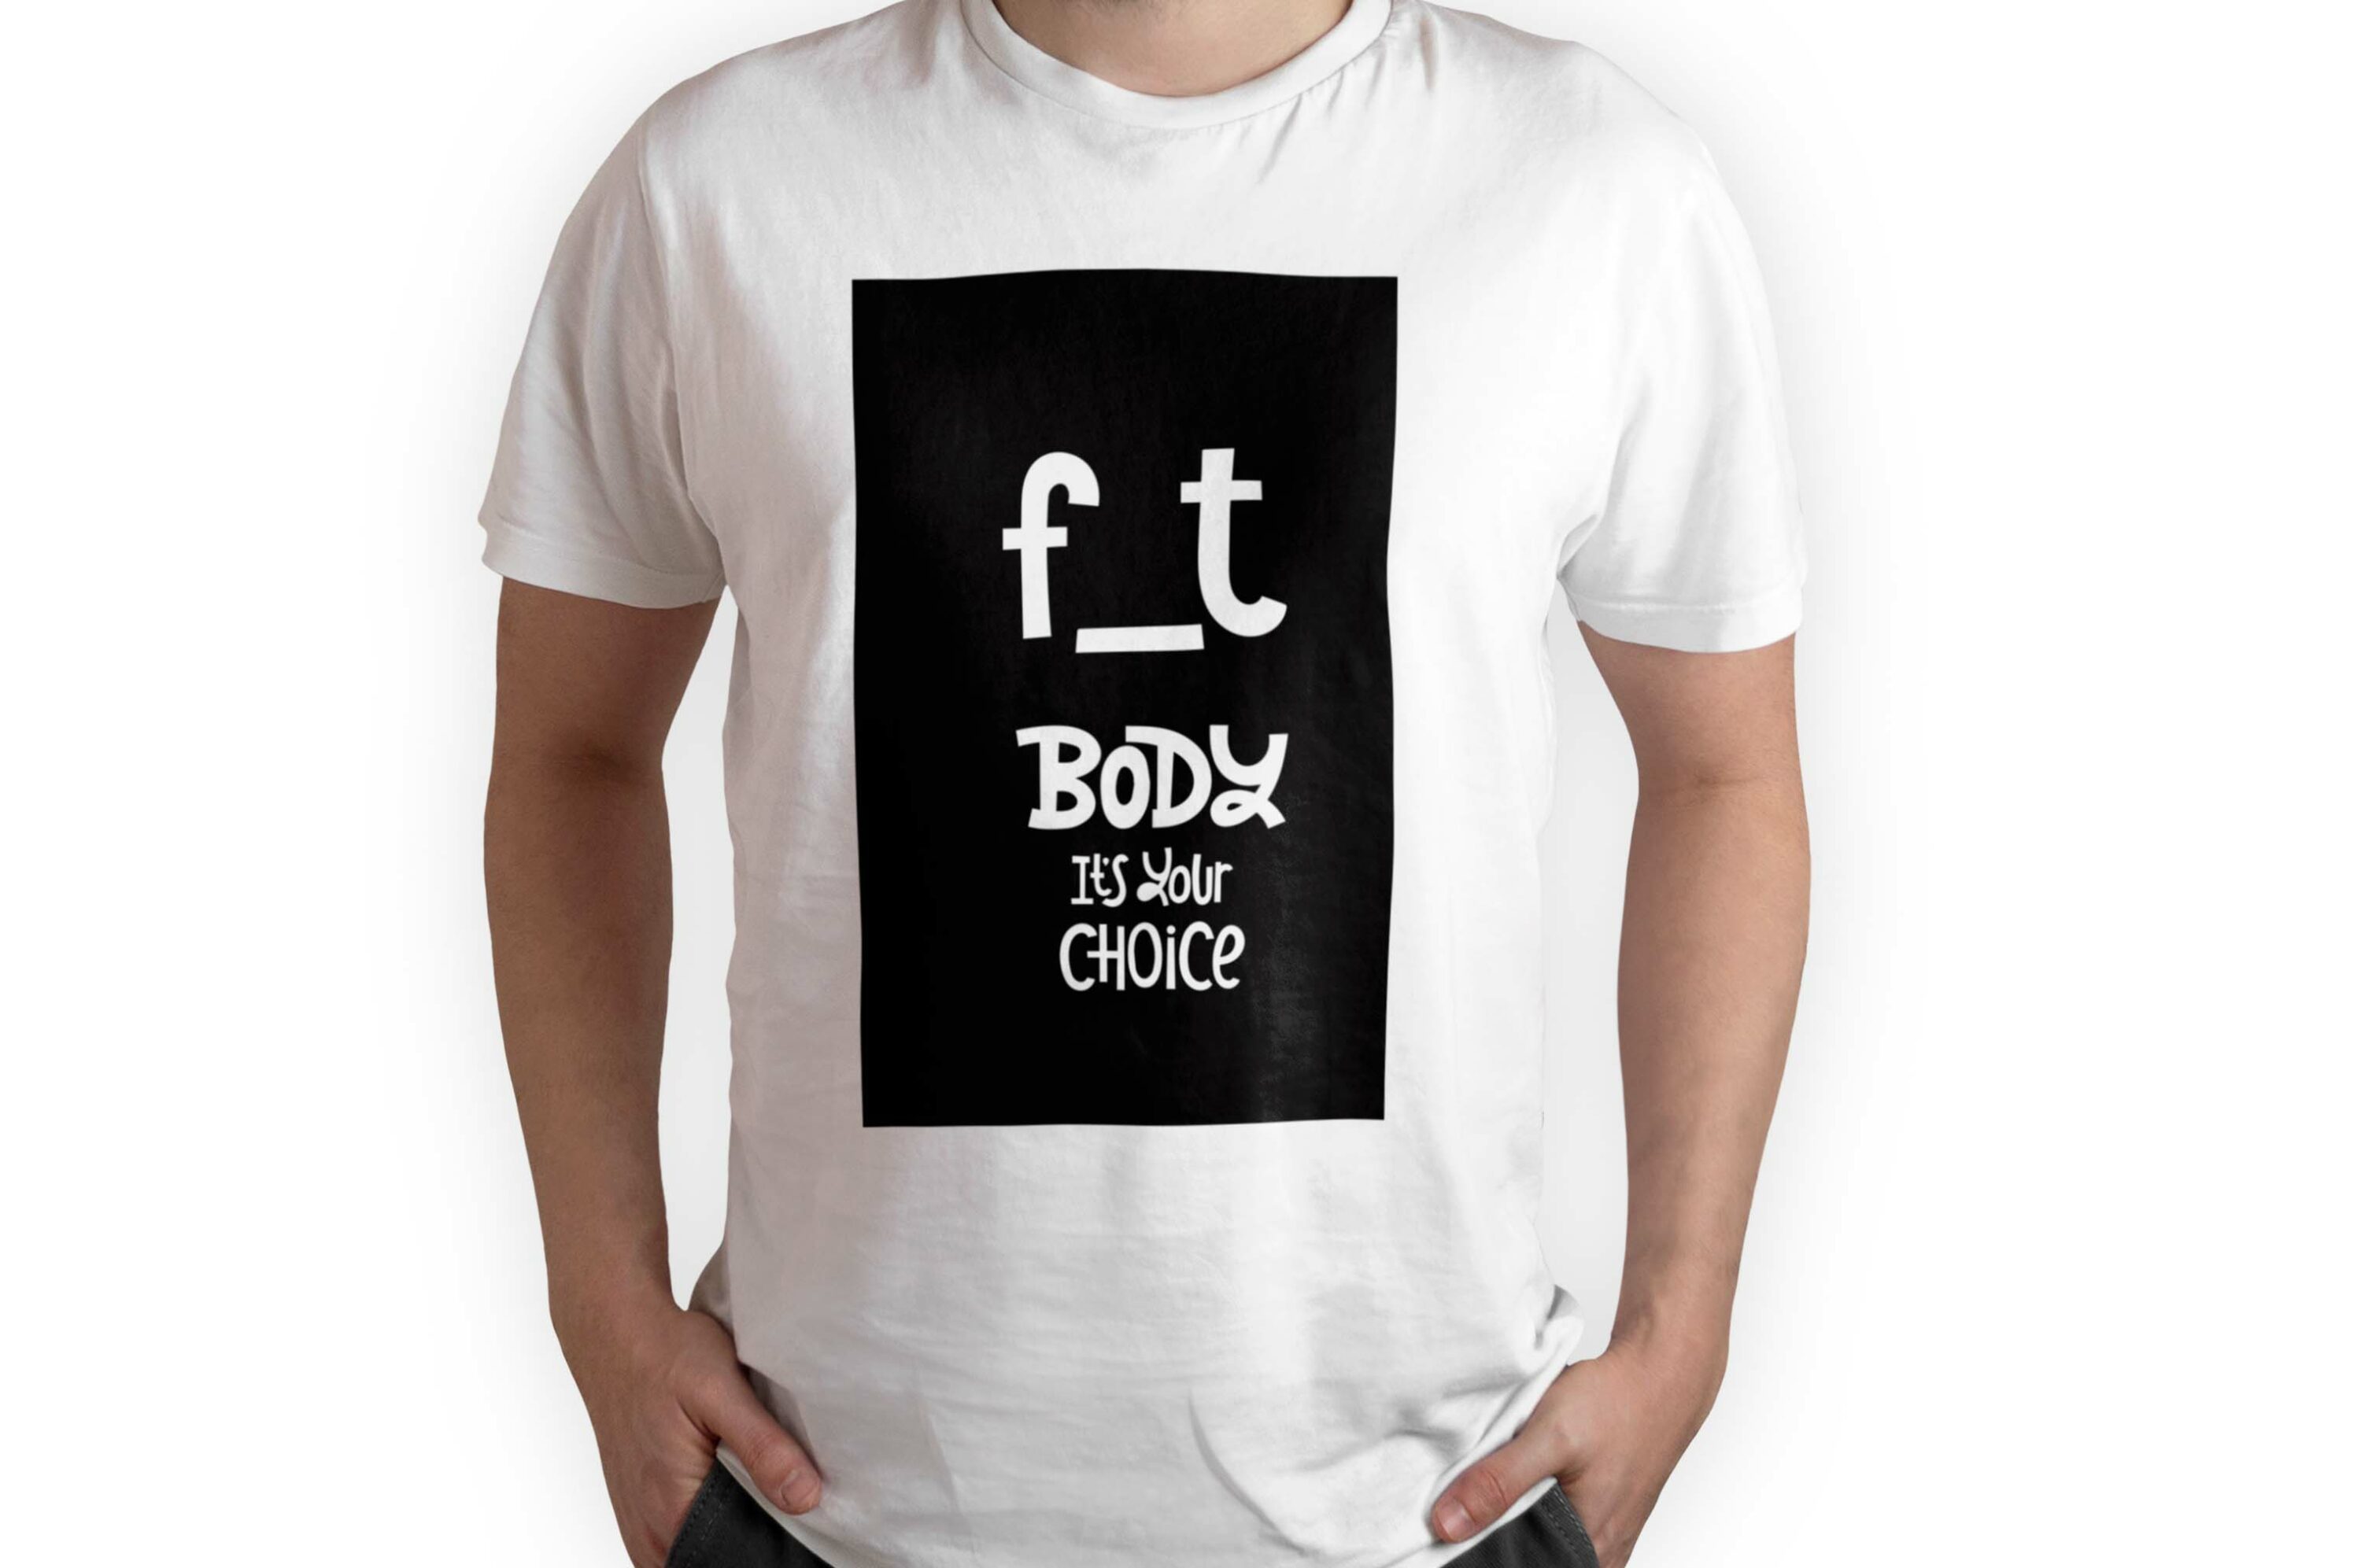 Bundle of 156 T-shirt Designs with Fitness Quotes, f_t body it's your choice in black rectangular.